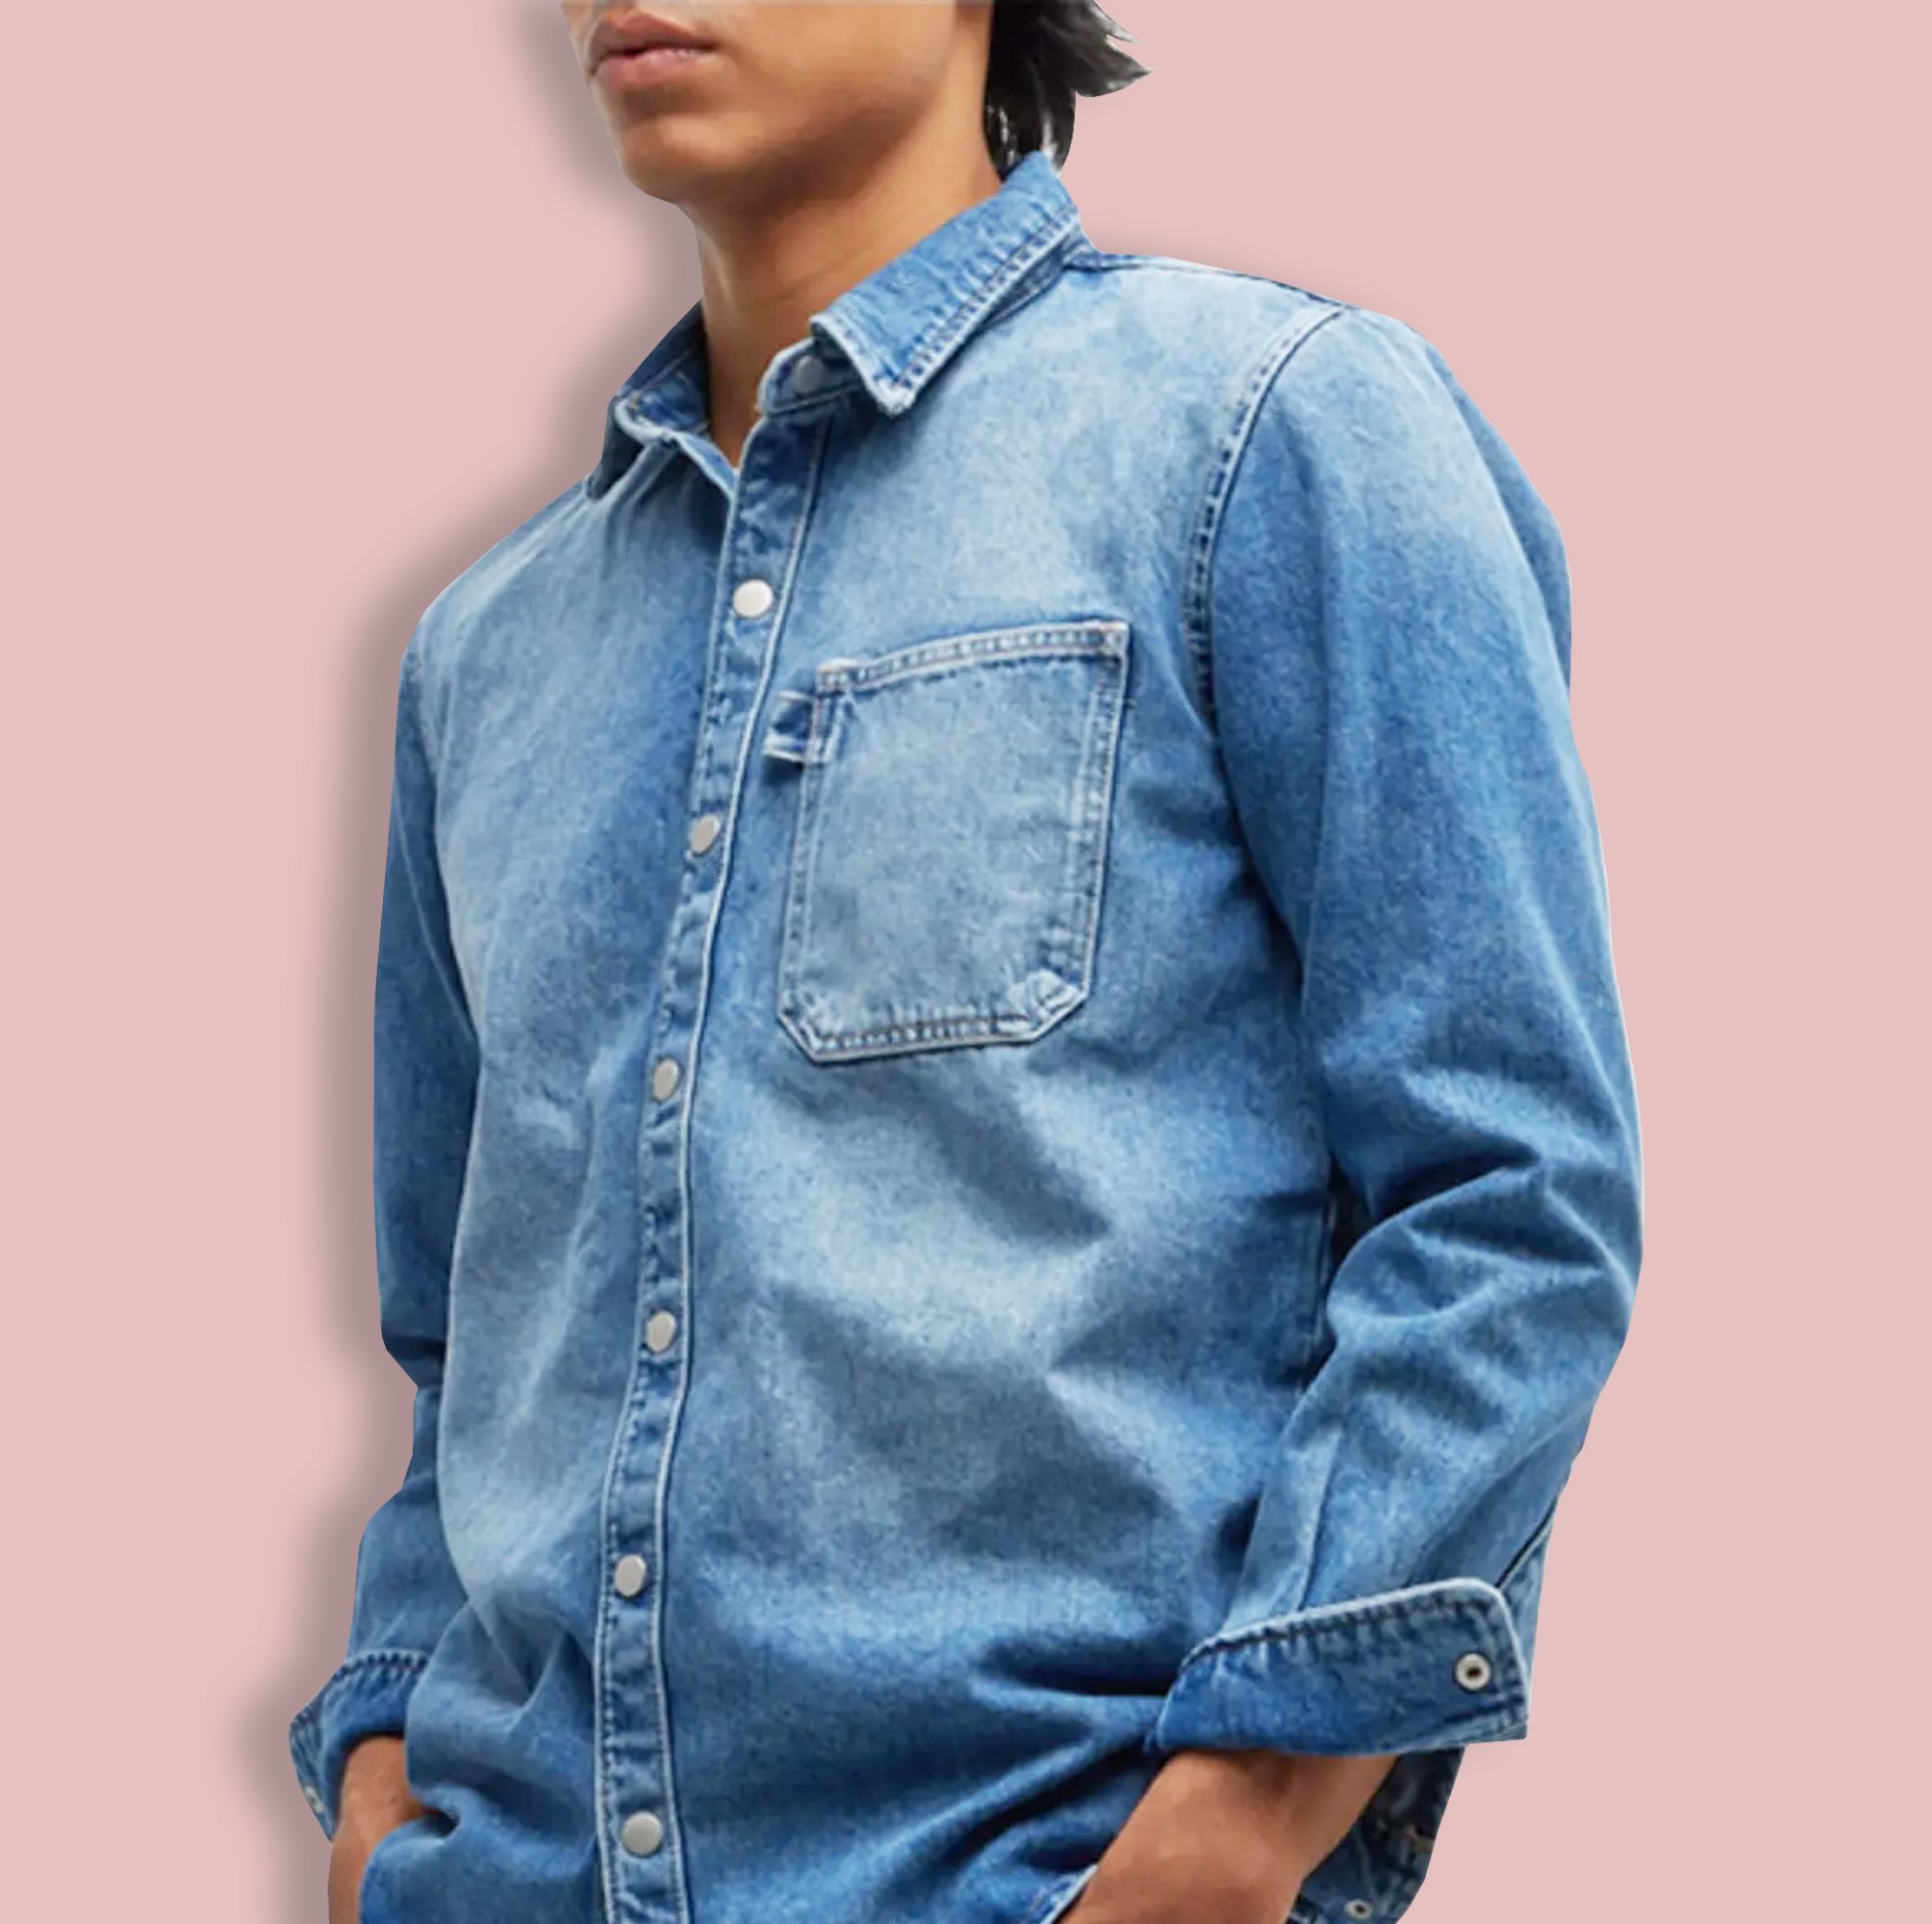 If You Don't Have a Denim Shirt Yet, What's Stopping You?